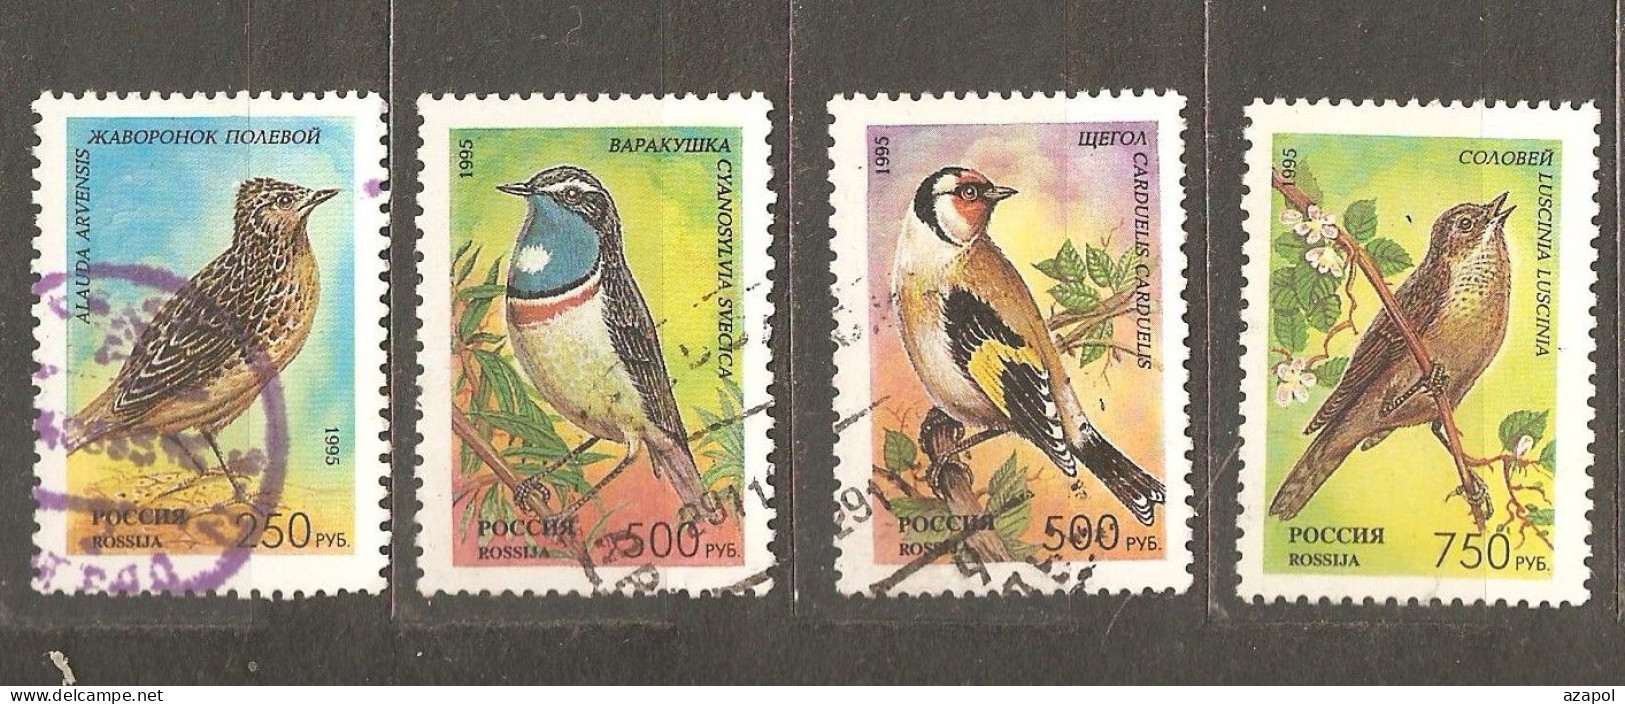 Russia: 4 Used Stamps Of A Set, Songbirds, 1995, Mi#440-4 - Usati